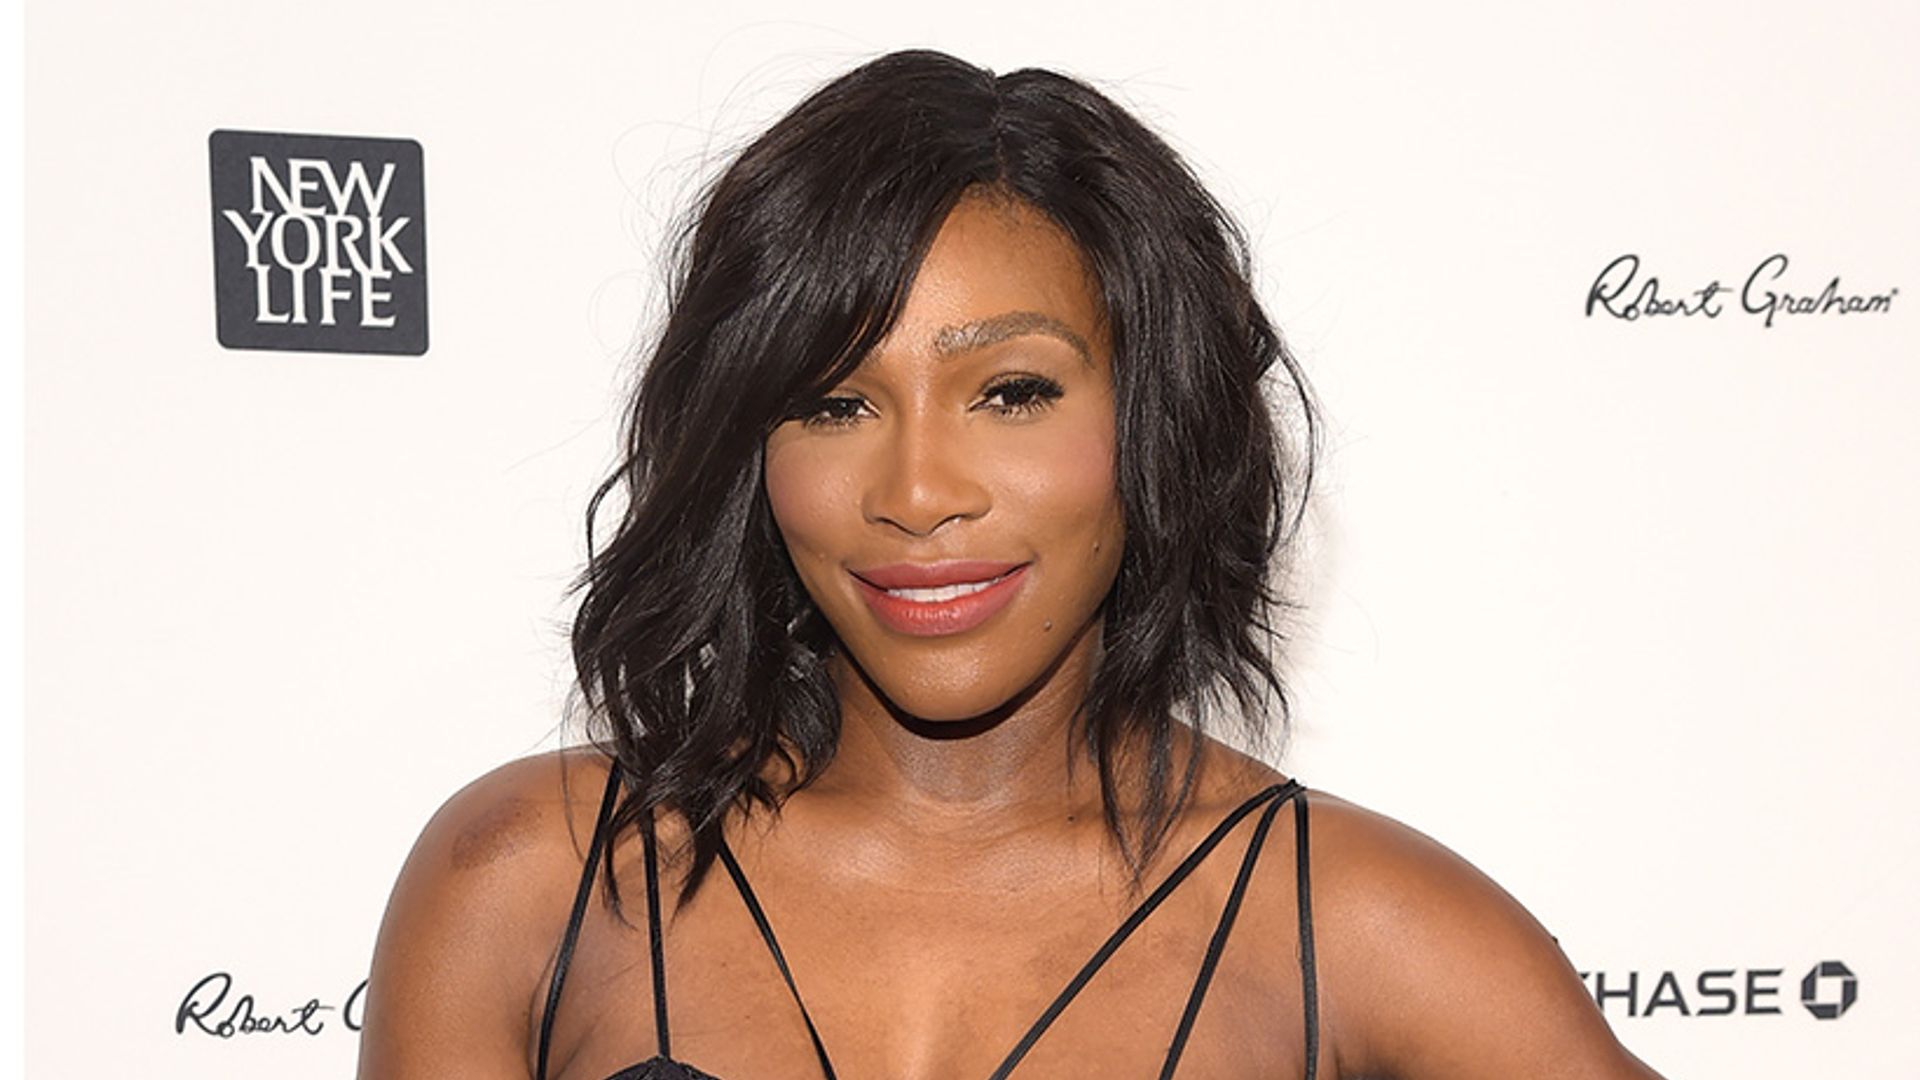 Serena Williams posts gorgeous photo of baby Alexis Olympia - see it here